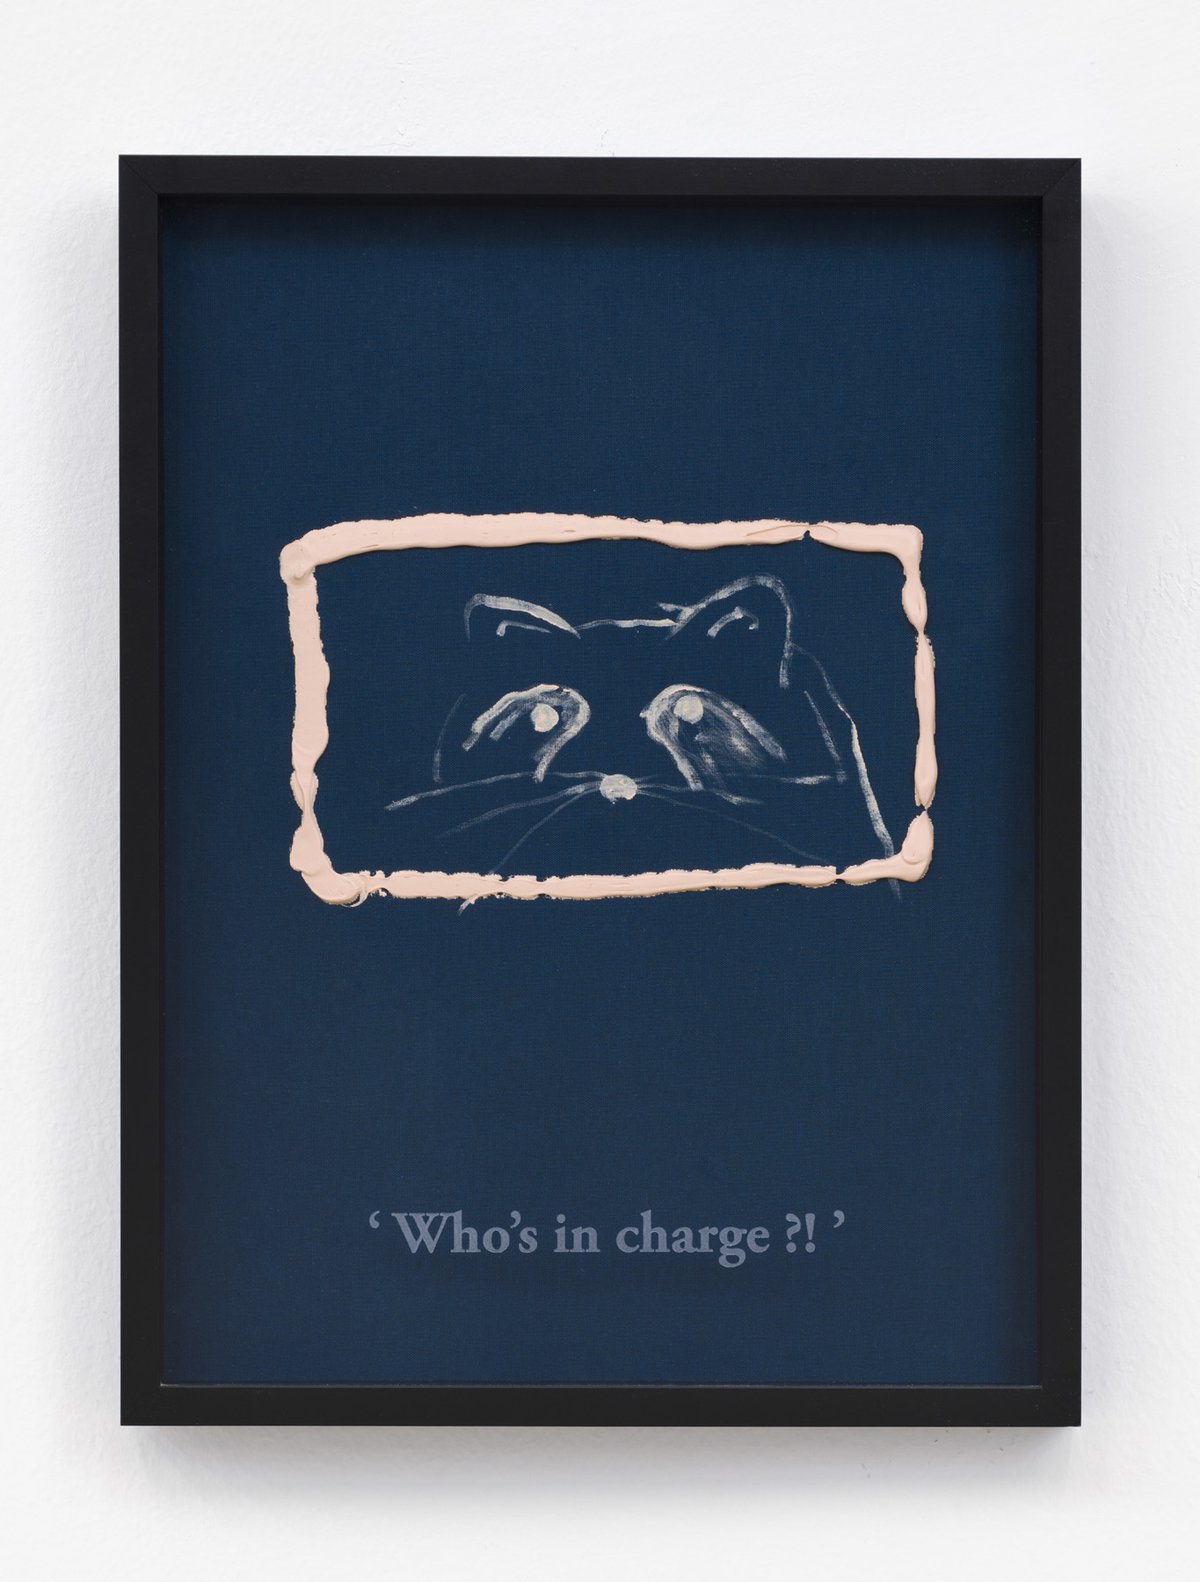 Philipp Timischl&quot;Who&#x27;s in charge?!&quot; (Navy/Flesh Colour), 2017Acrylic on linen and glass-engraved object frame40.1 x 32.1 cm